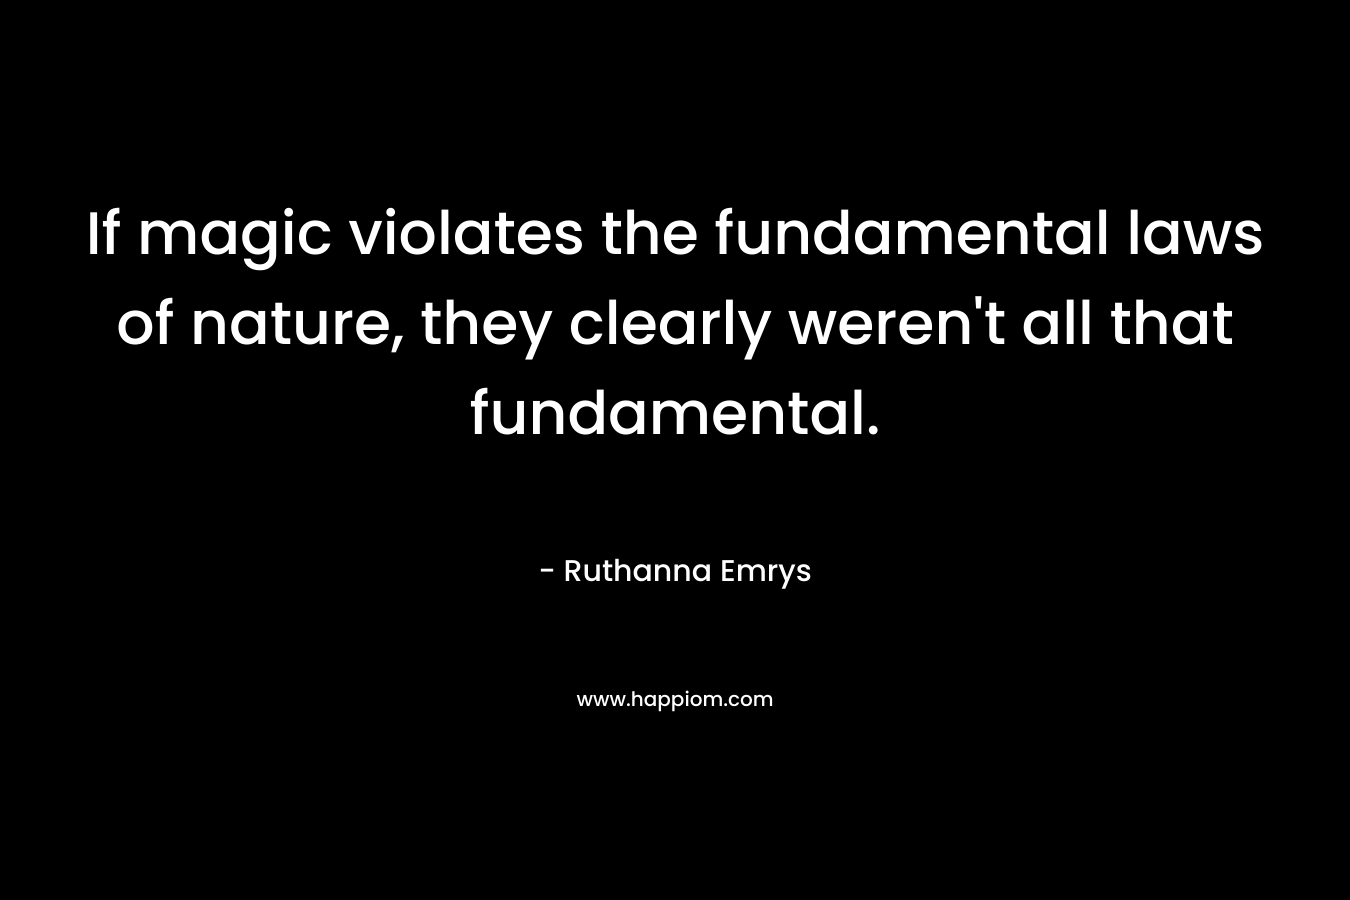 If magic violates the fundamental laws of nature, they clearly weren’t all that fundamental. – Ruthanna Emrys